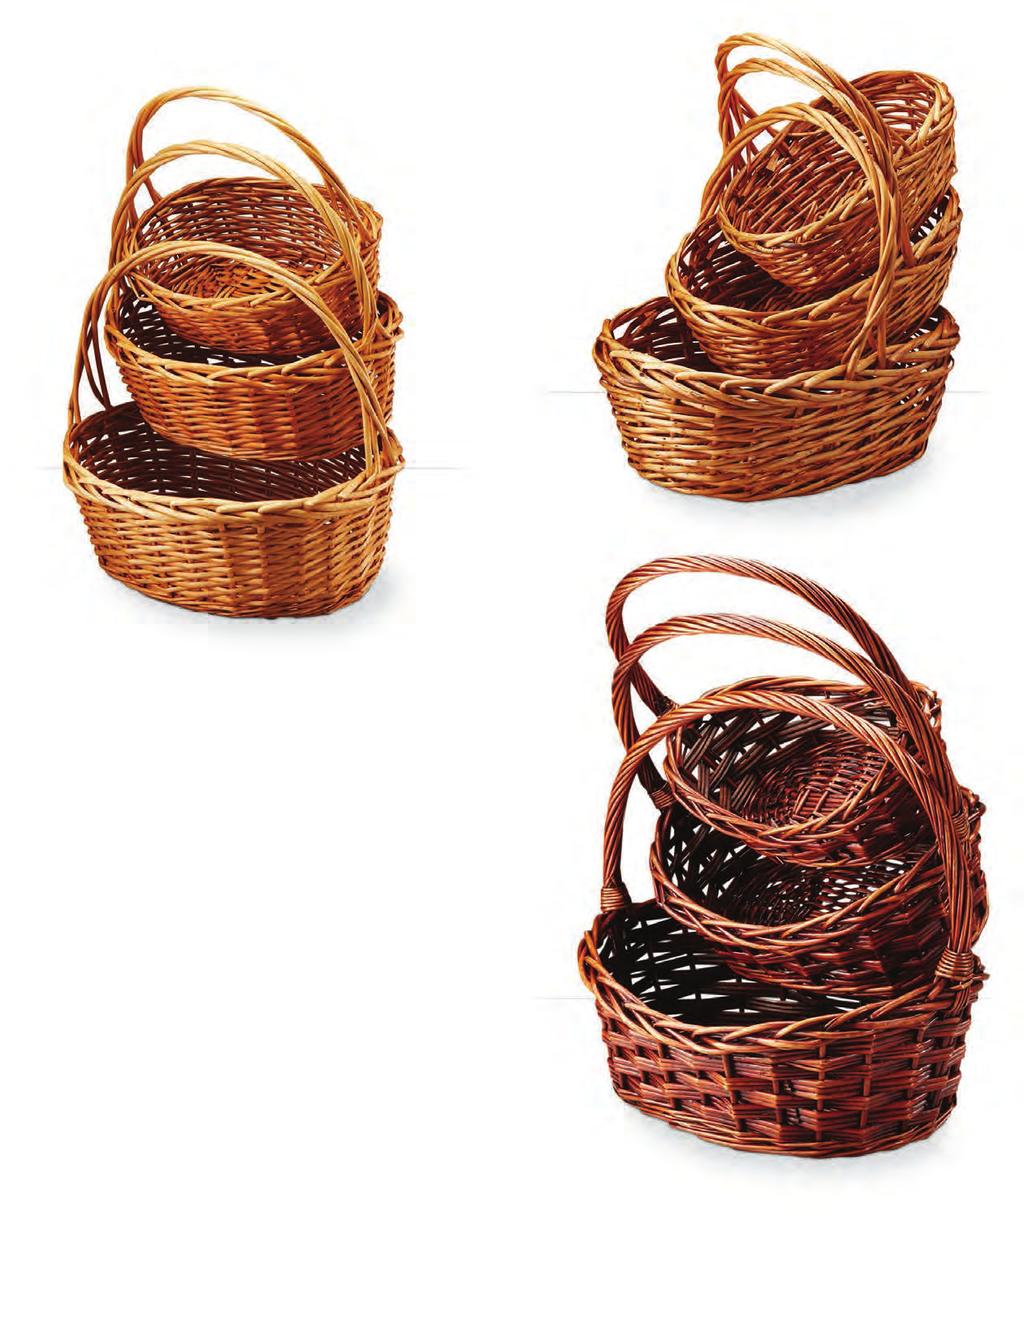 Baskets Without Plastic Liners 64600 Set/3 Willow Baskets with East/West Handle Buff color Large: 16.5 x 12.75 x 6.25 Small: 13 X 9.